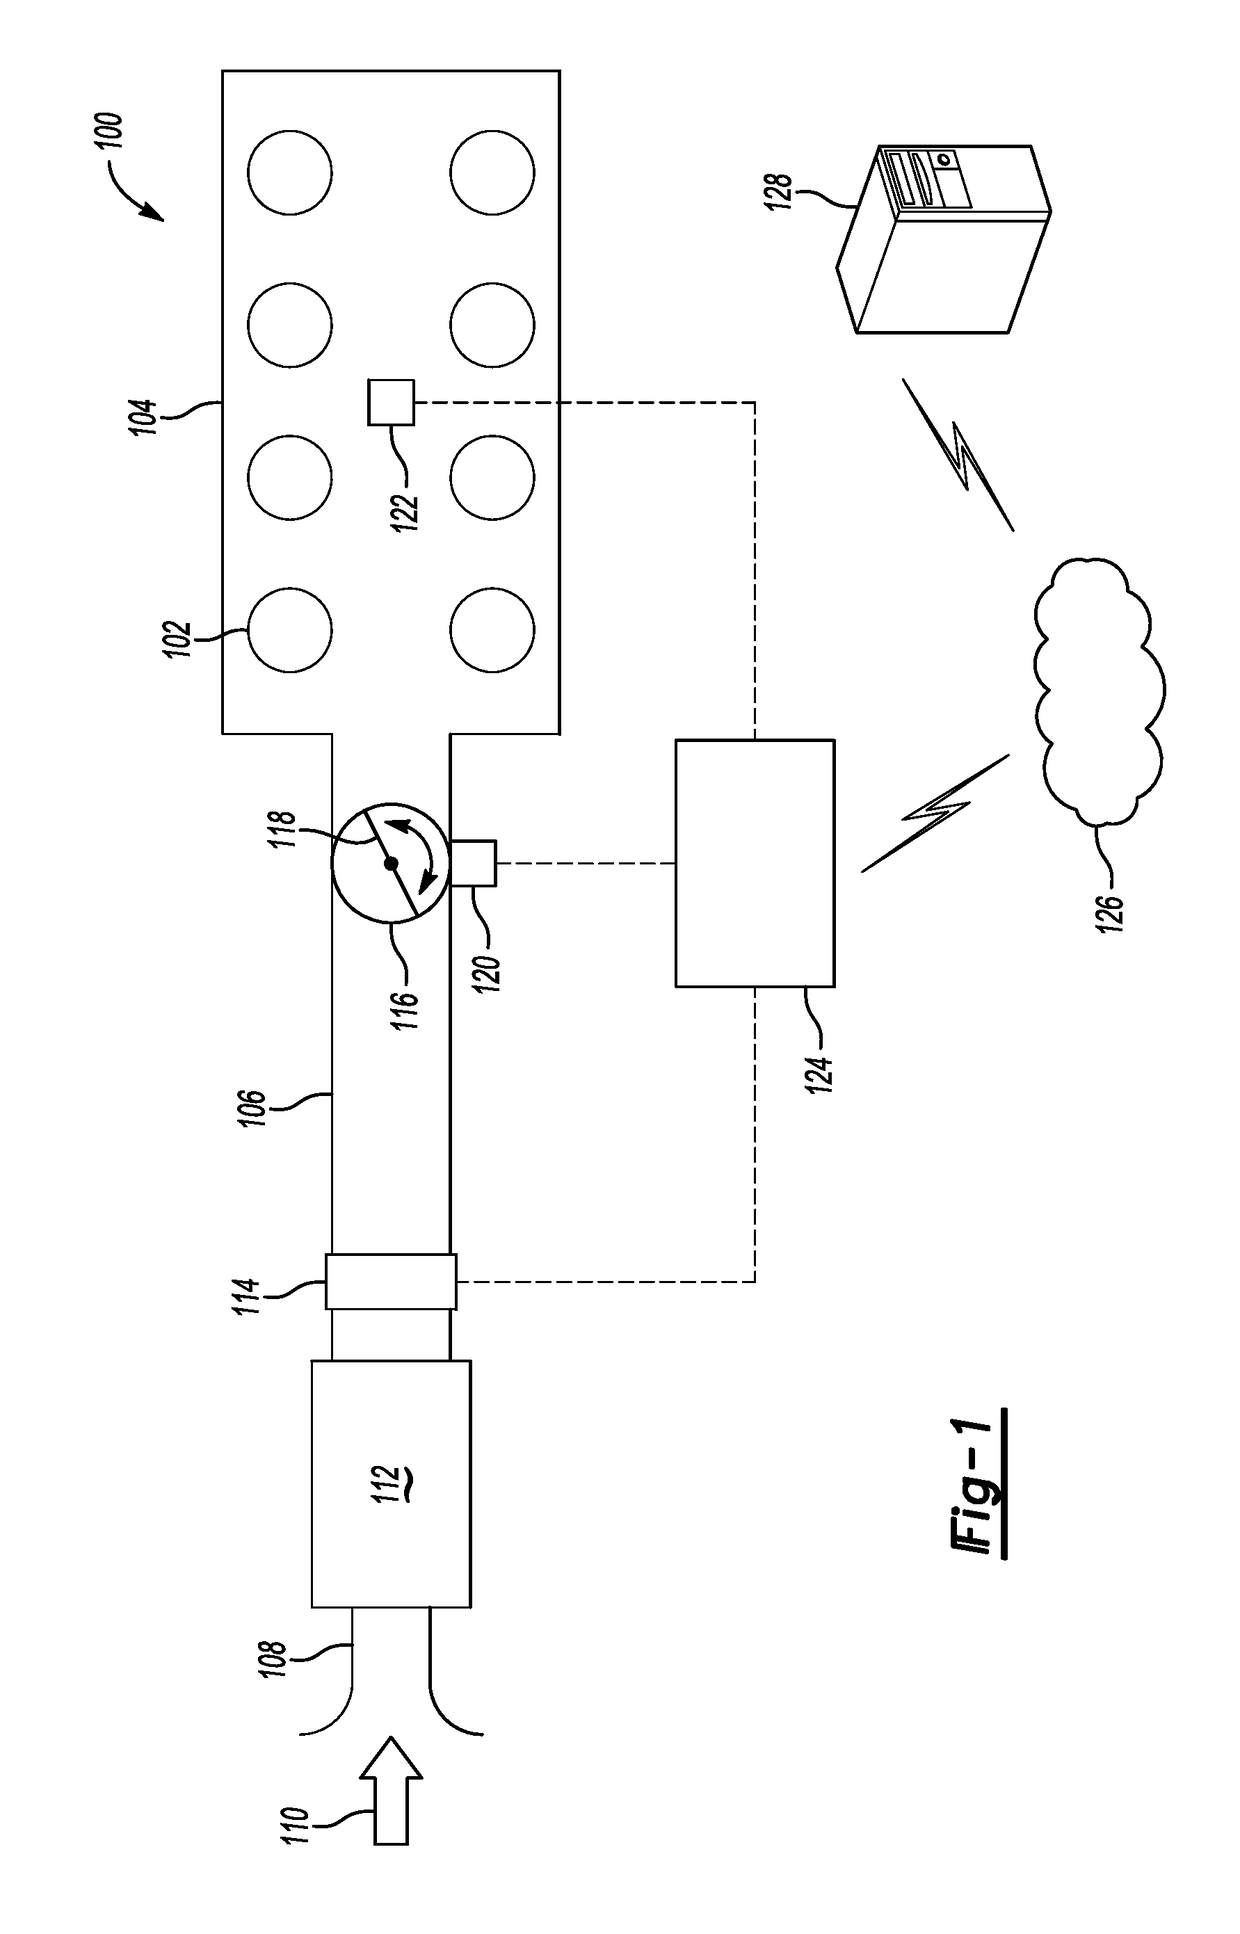 Combustion engine airflow management systems and methods